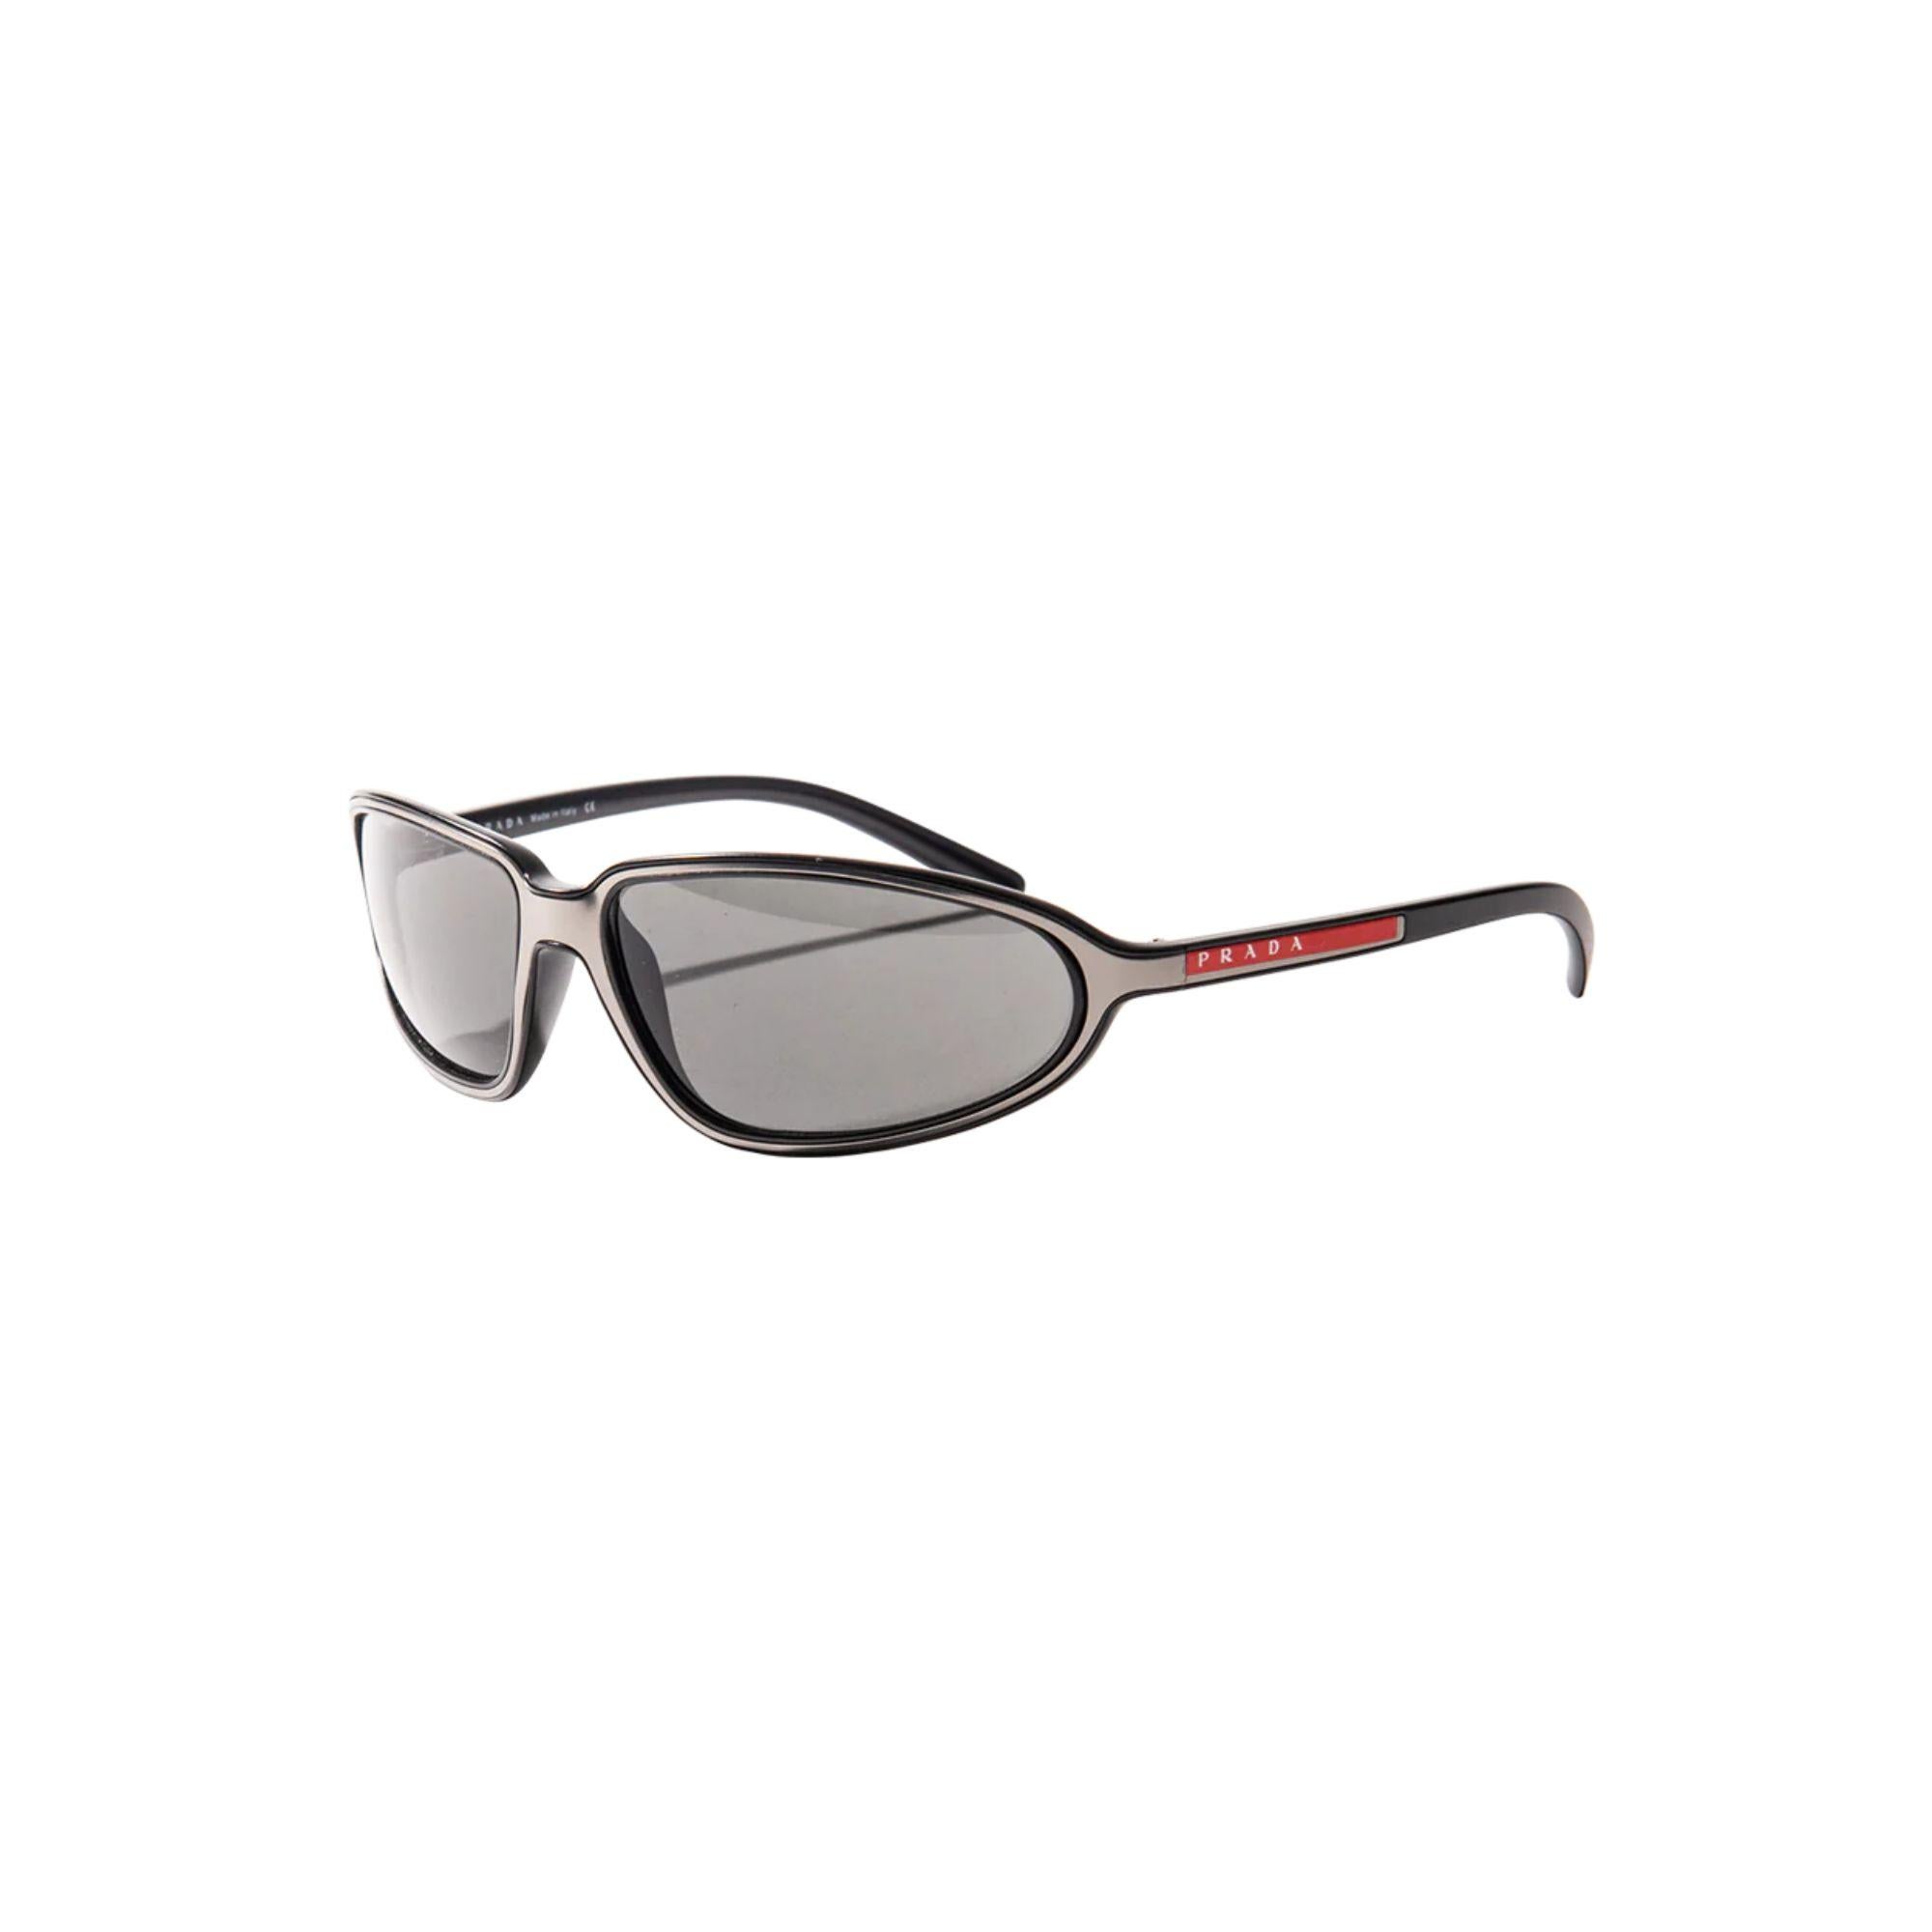 c. 1999 Prada black and silver sunglasses. Black frame sunglasses with metallic silver overlay throughout and red Prada logo on side. As seen on Brad Pitt throughout many iconic moments in the 1990s and early 2000's. One size fits all (mid-sized